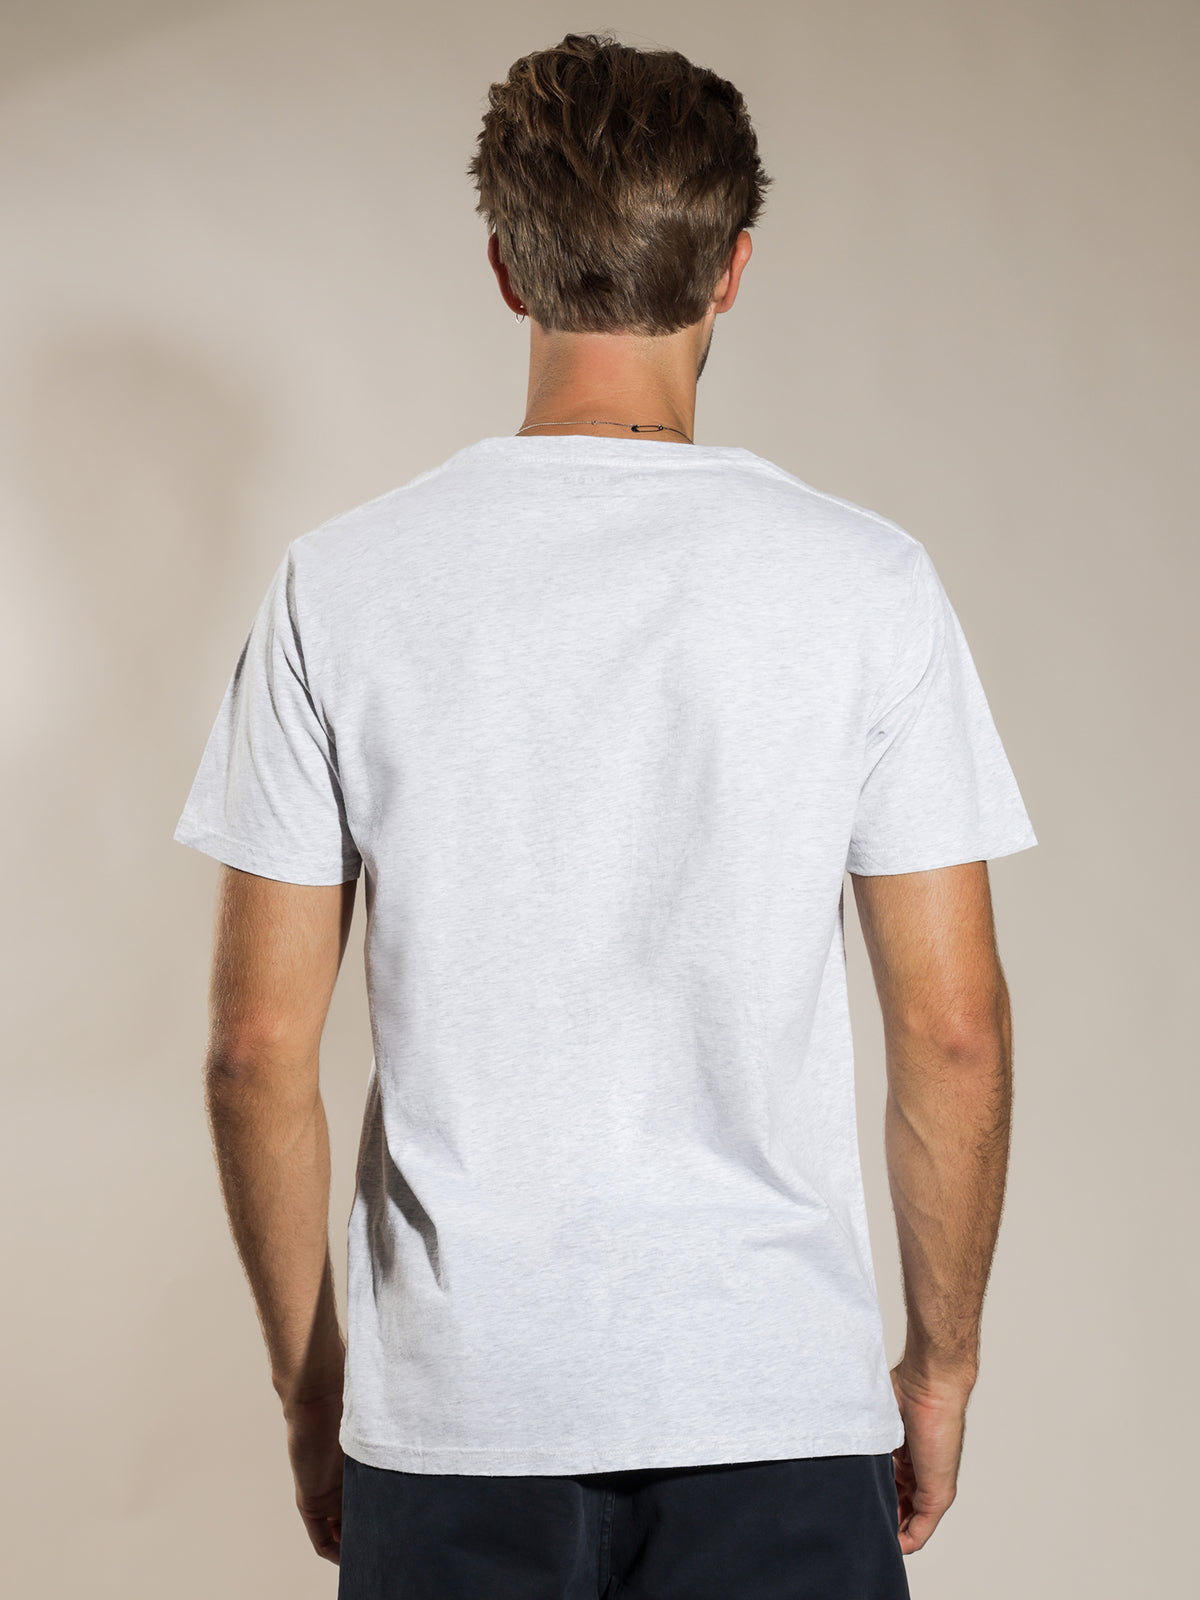 Basic Crew T-Shirt in Snow Marle